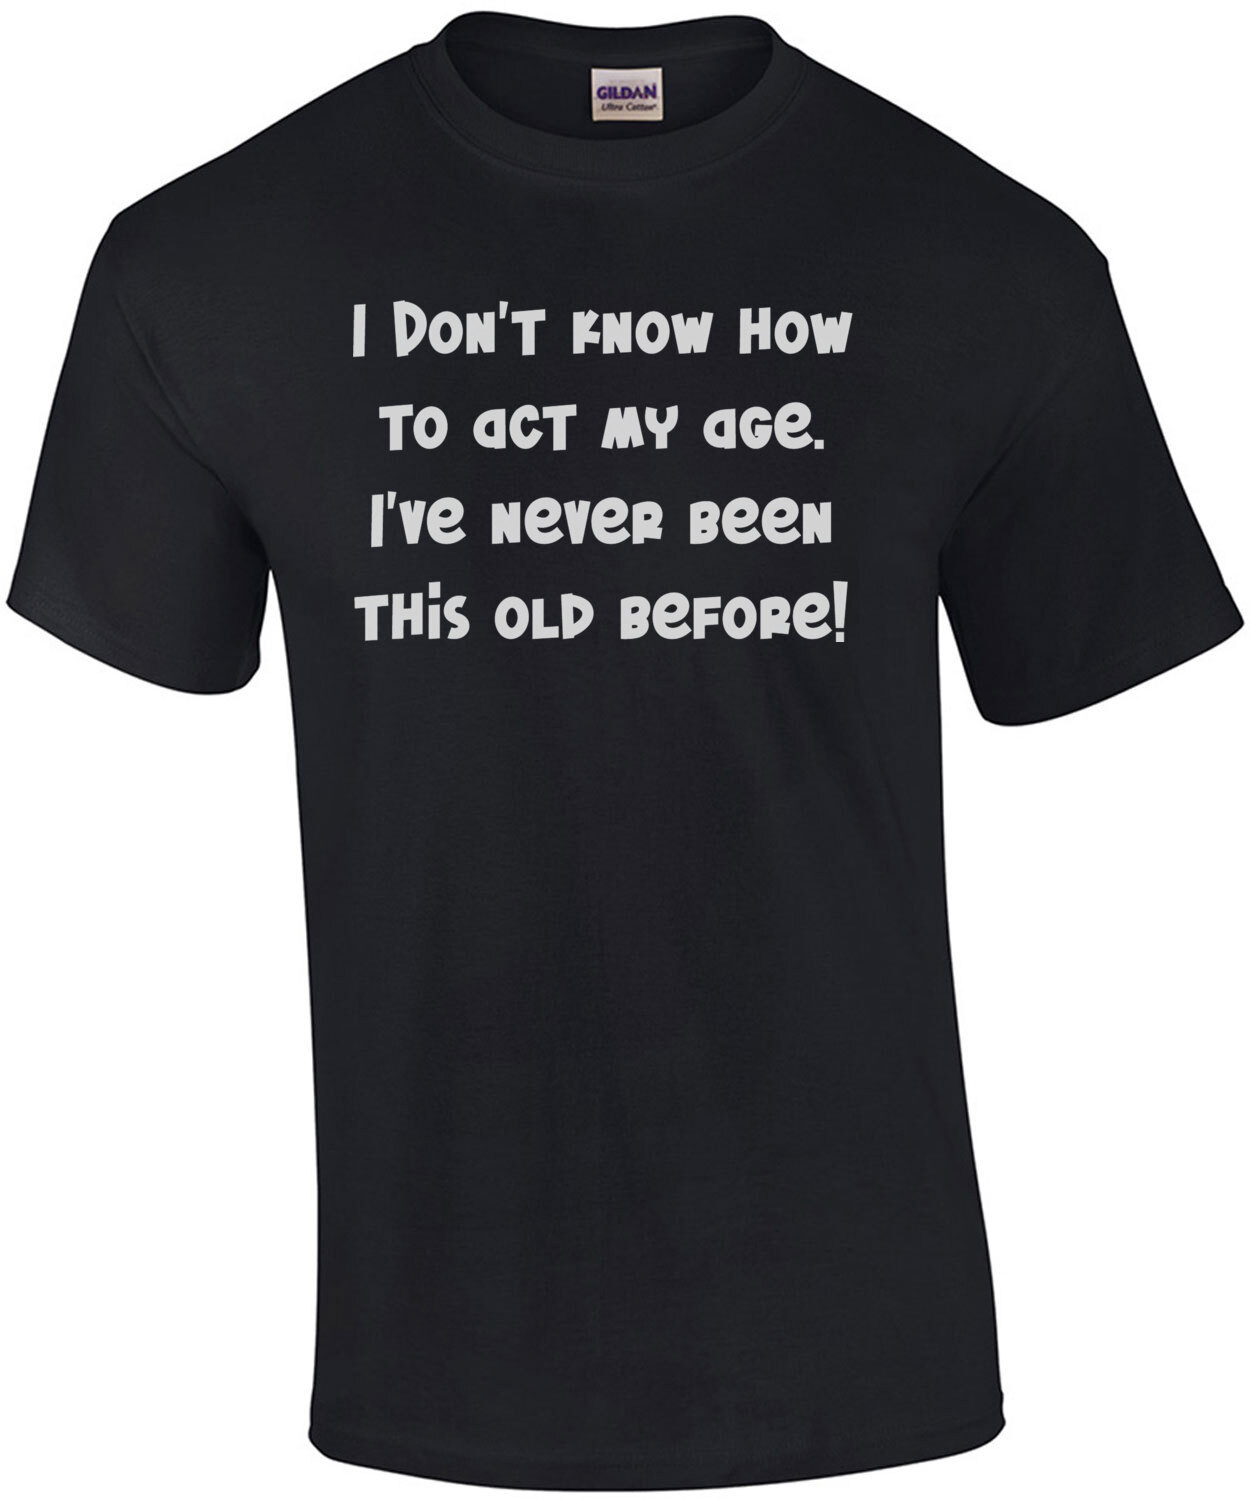 I Don't Know How To Act My Age. I've Never Been This Old Before!  Funny Shirt